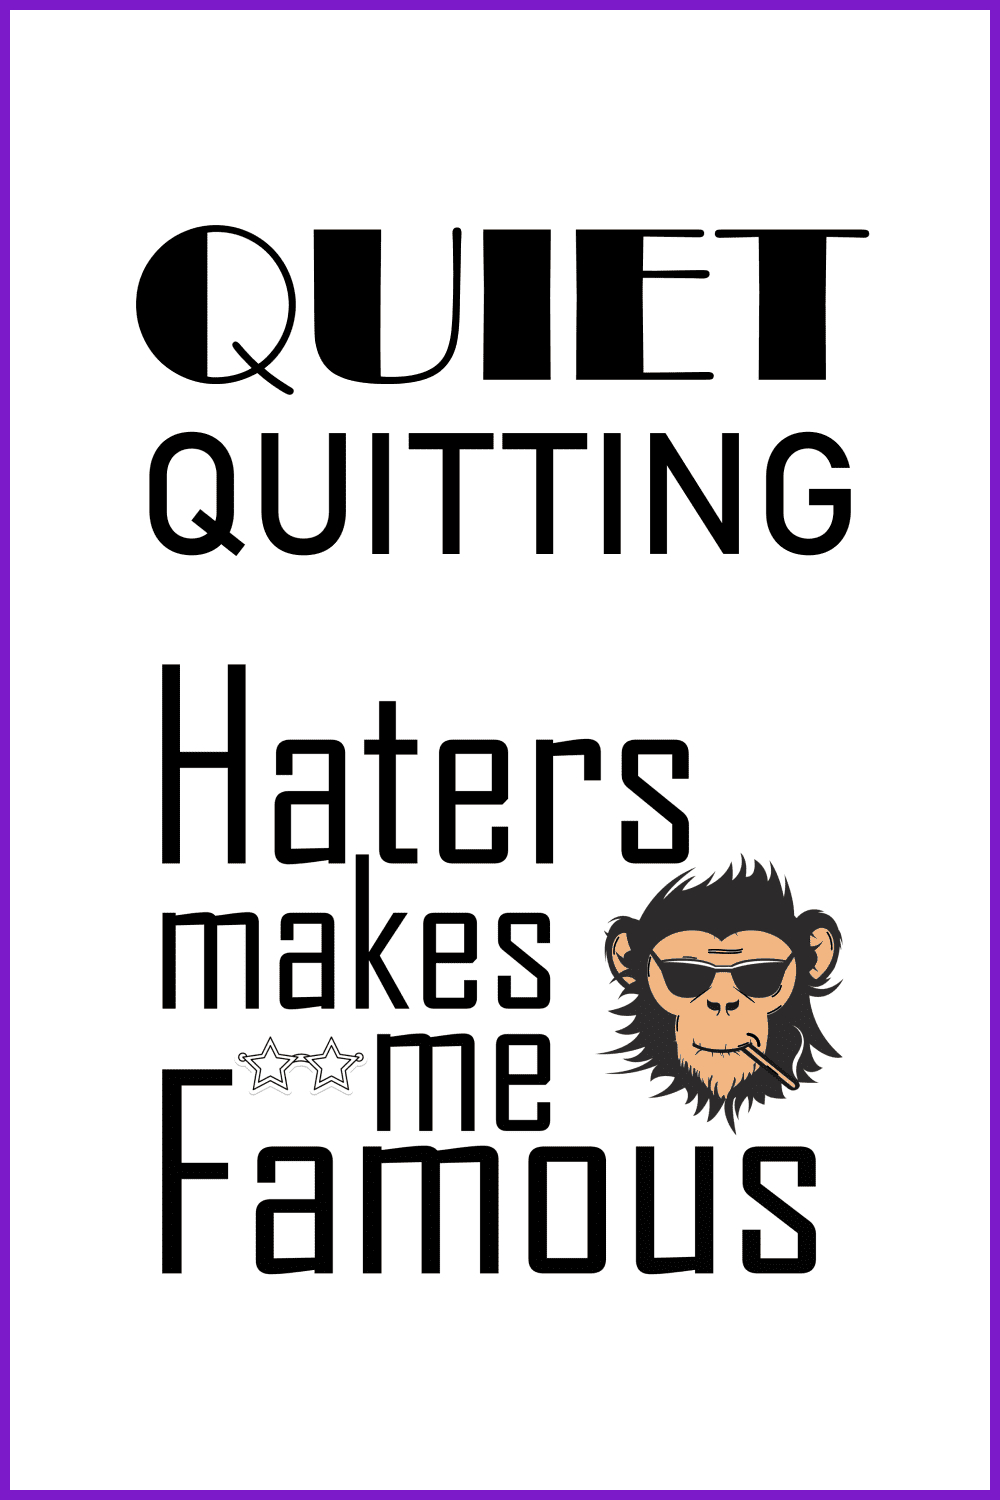 Black text and drawn muzzle of a monkey with a cigarette on a white background.